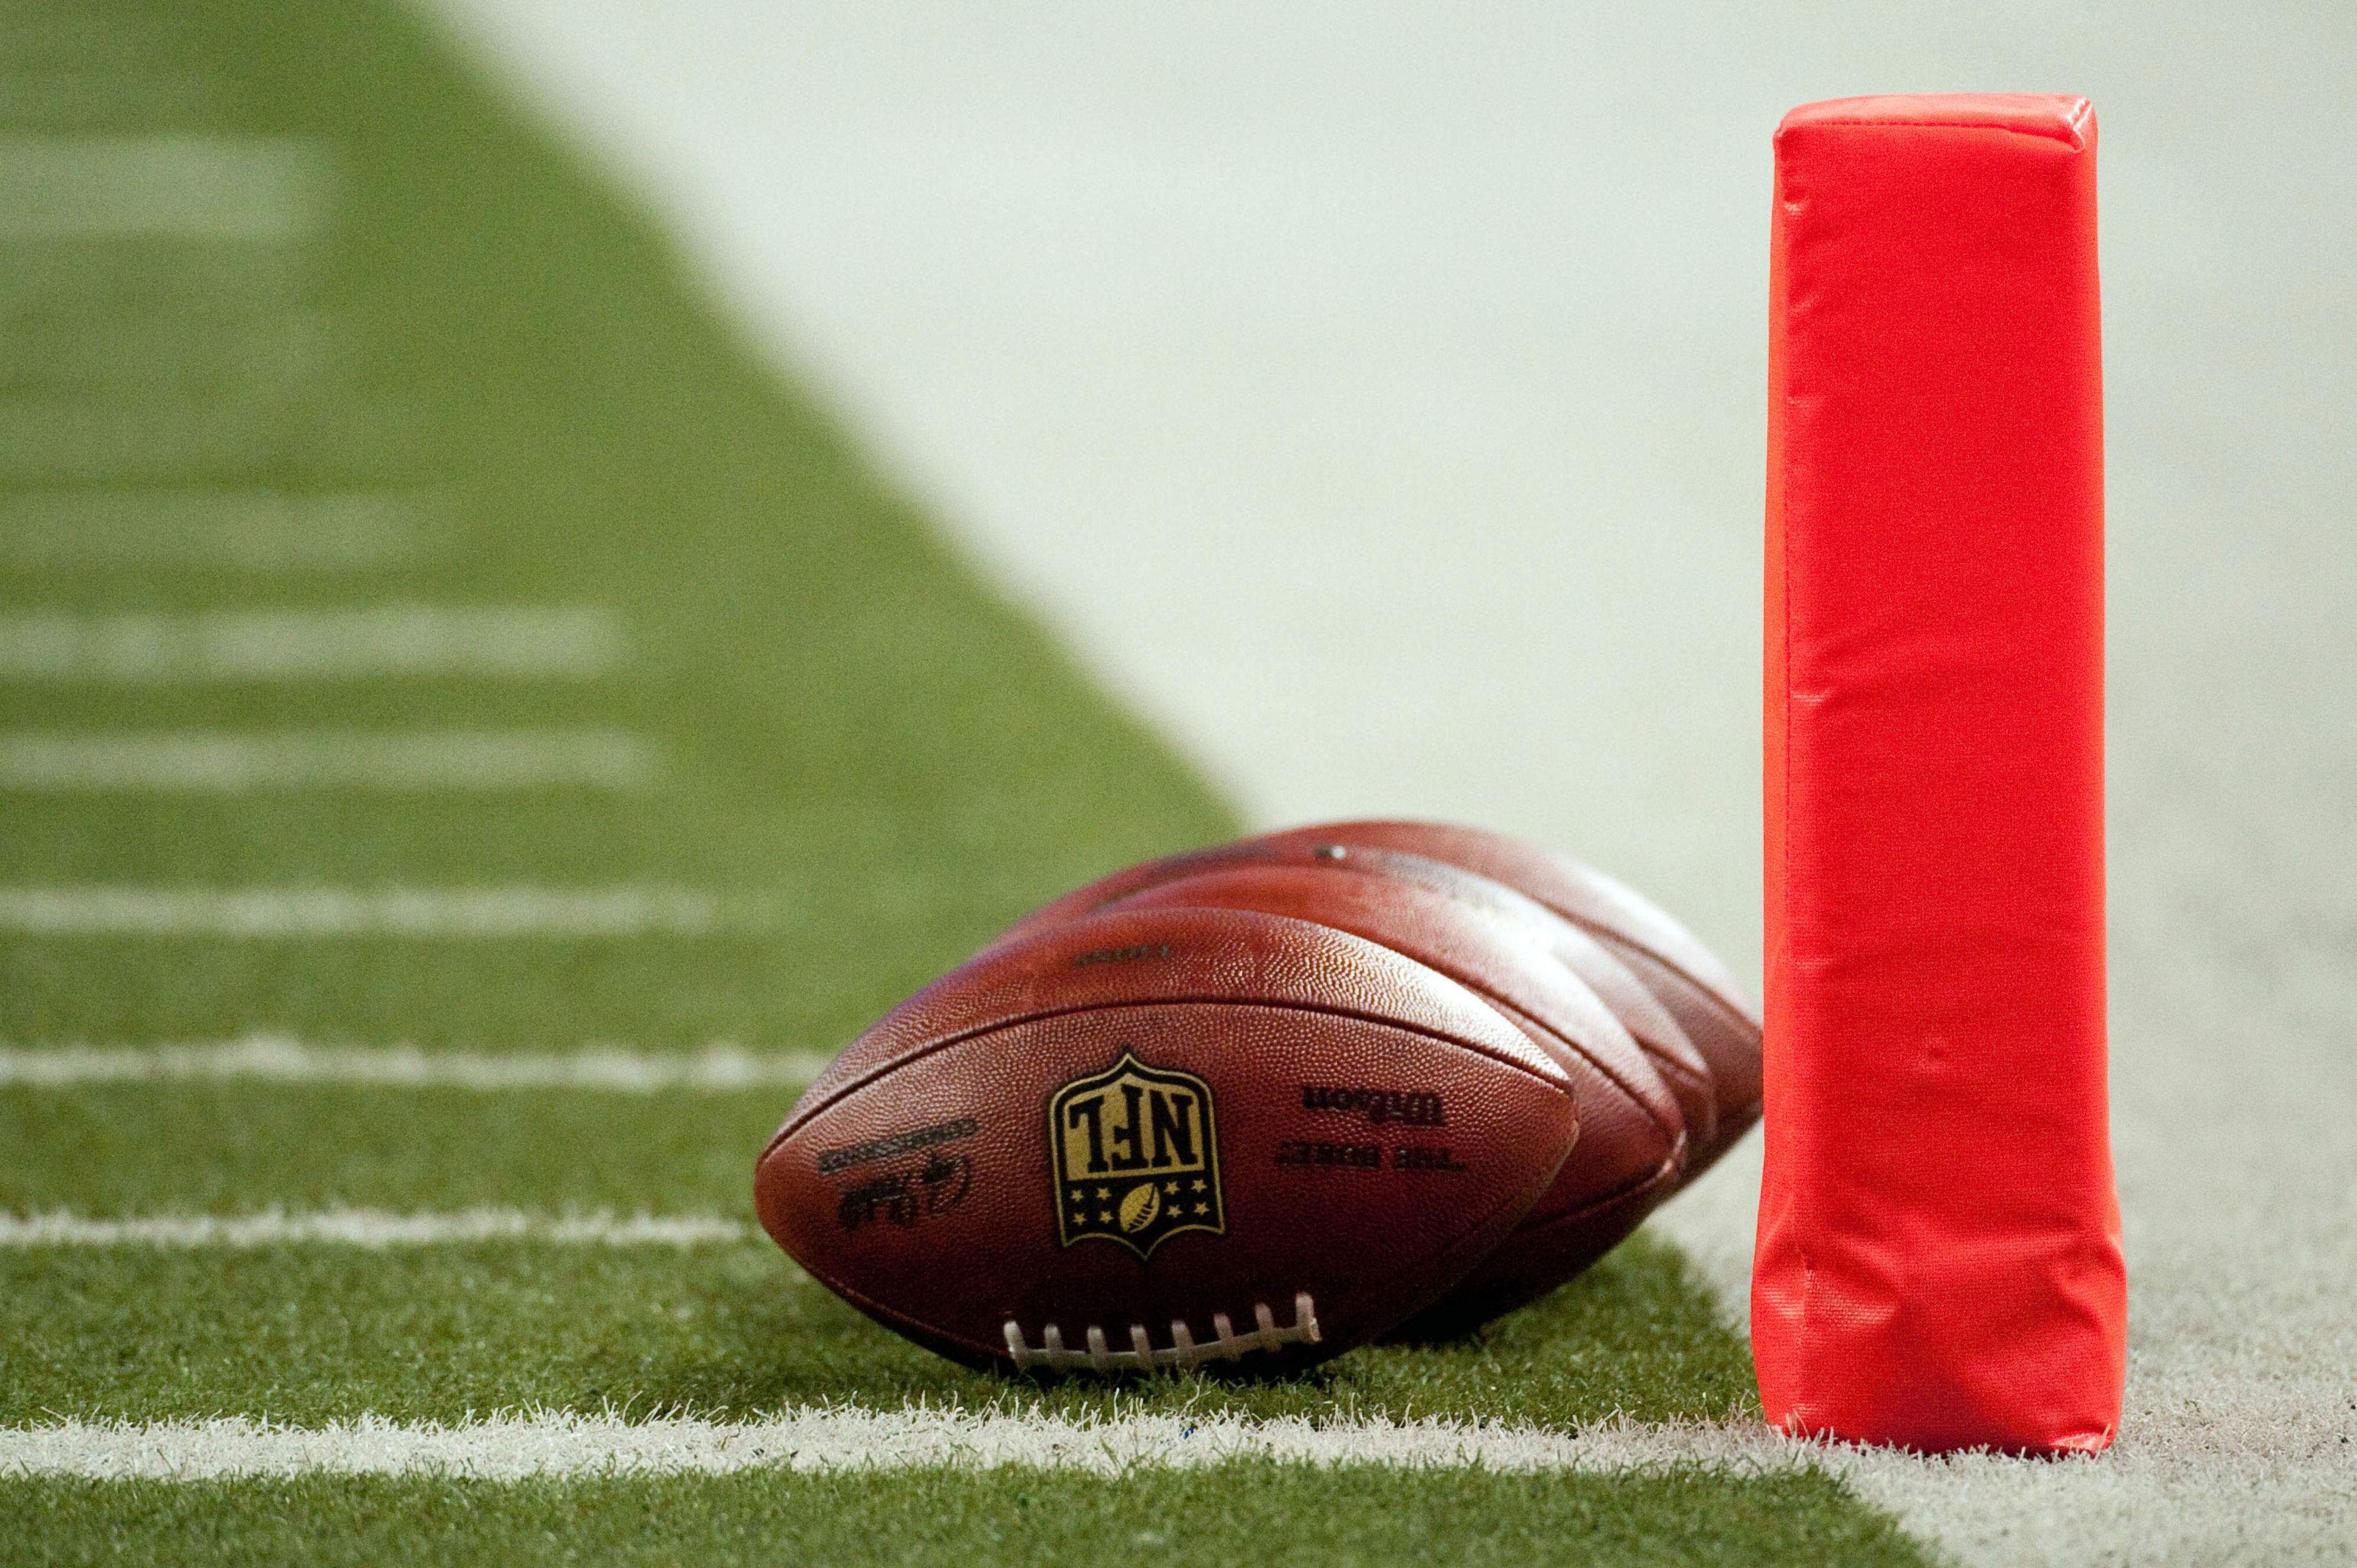 Aug 10, 2012; Detroit, MI, USA; A detailed view of footballs and the goal line marker before the preseason game between the Detroit Lions and the Cleveland Browns at Ford Field. Mandatory Credit: Tim Fuller-US PRESSWIRE